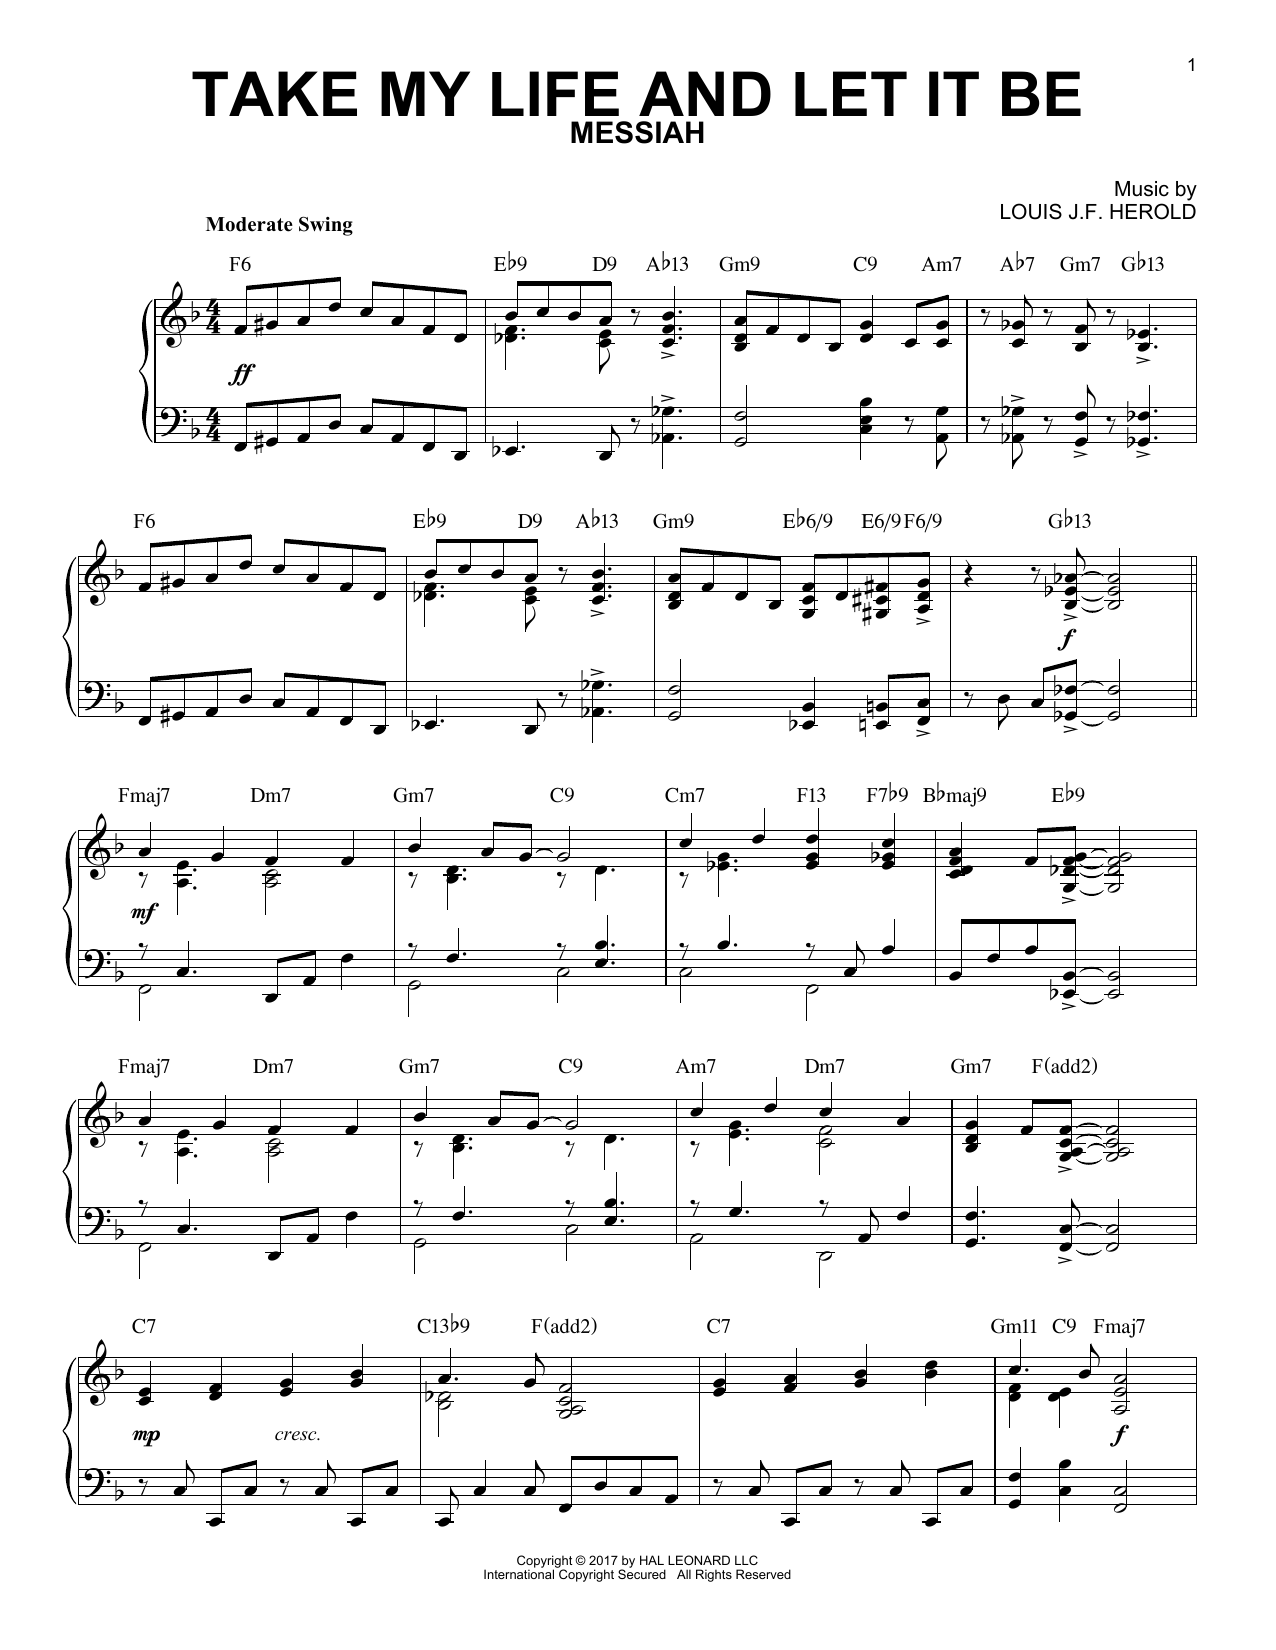 Download George Kingsley Take My Life And Let It Be [Jazz versio Sheet Music